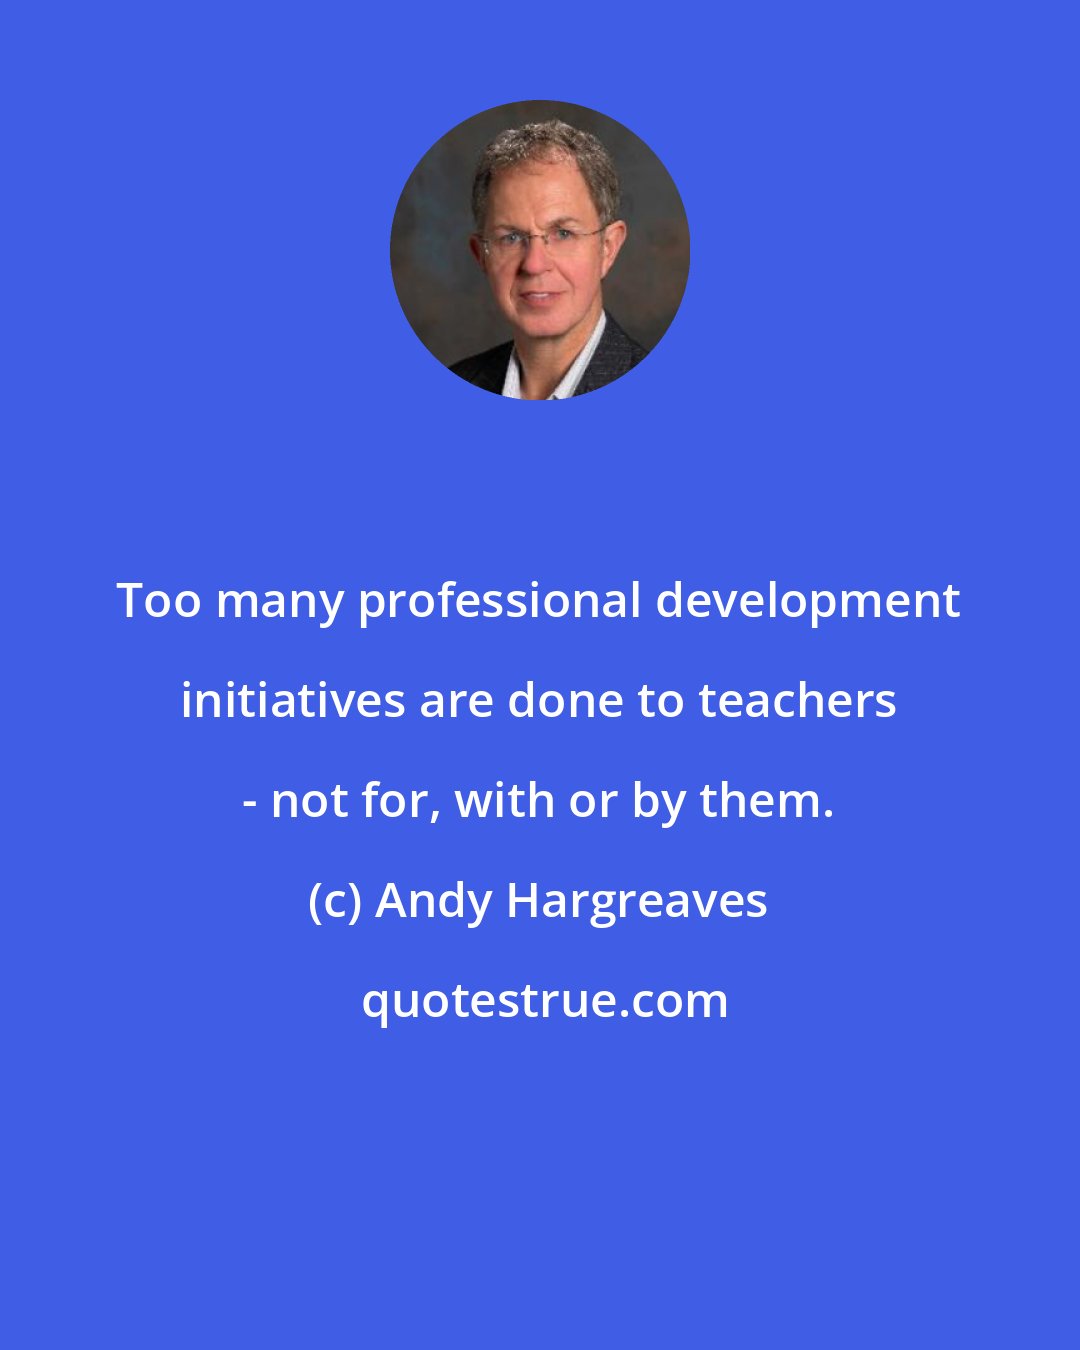 Andy Hargreaves: Too many professional development initiatives are done to teachers - not for, with or by them.